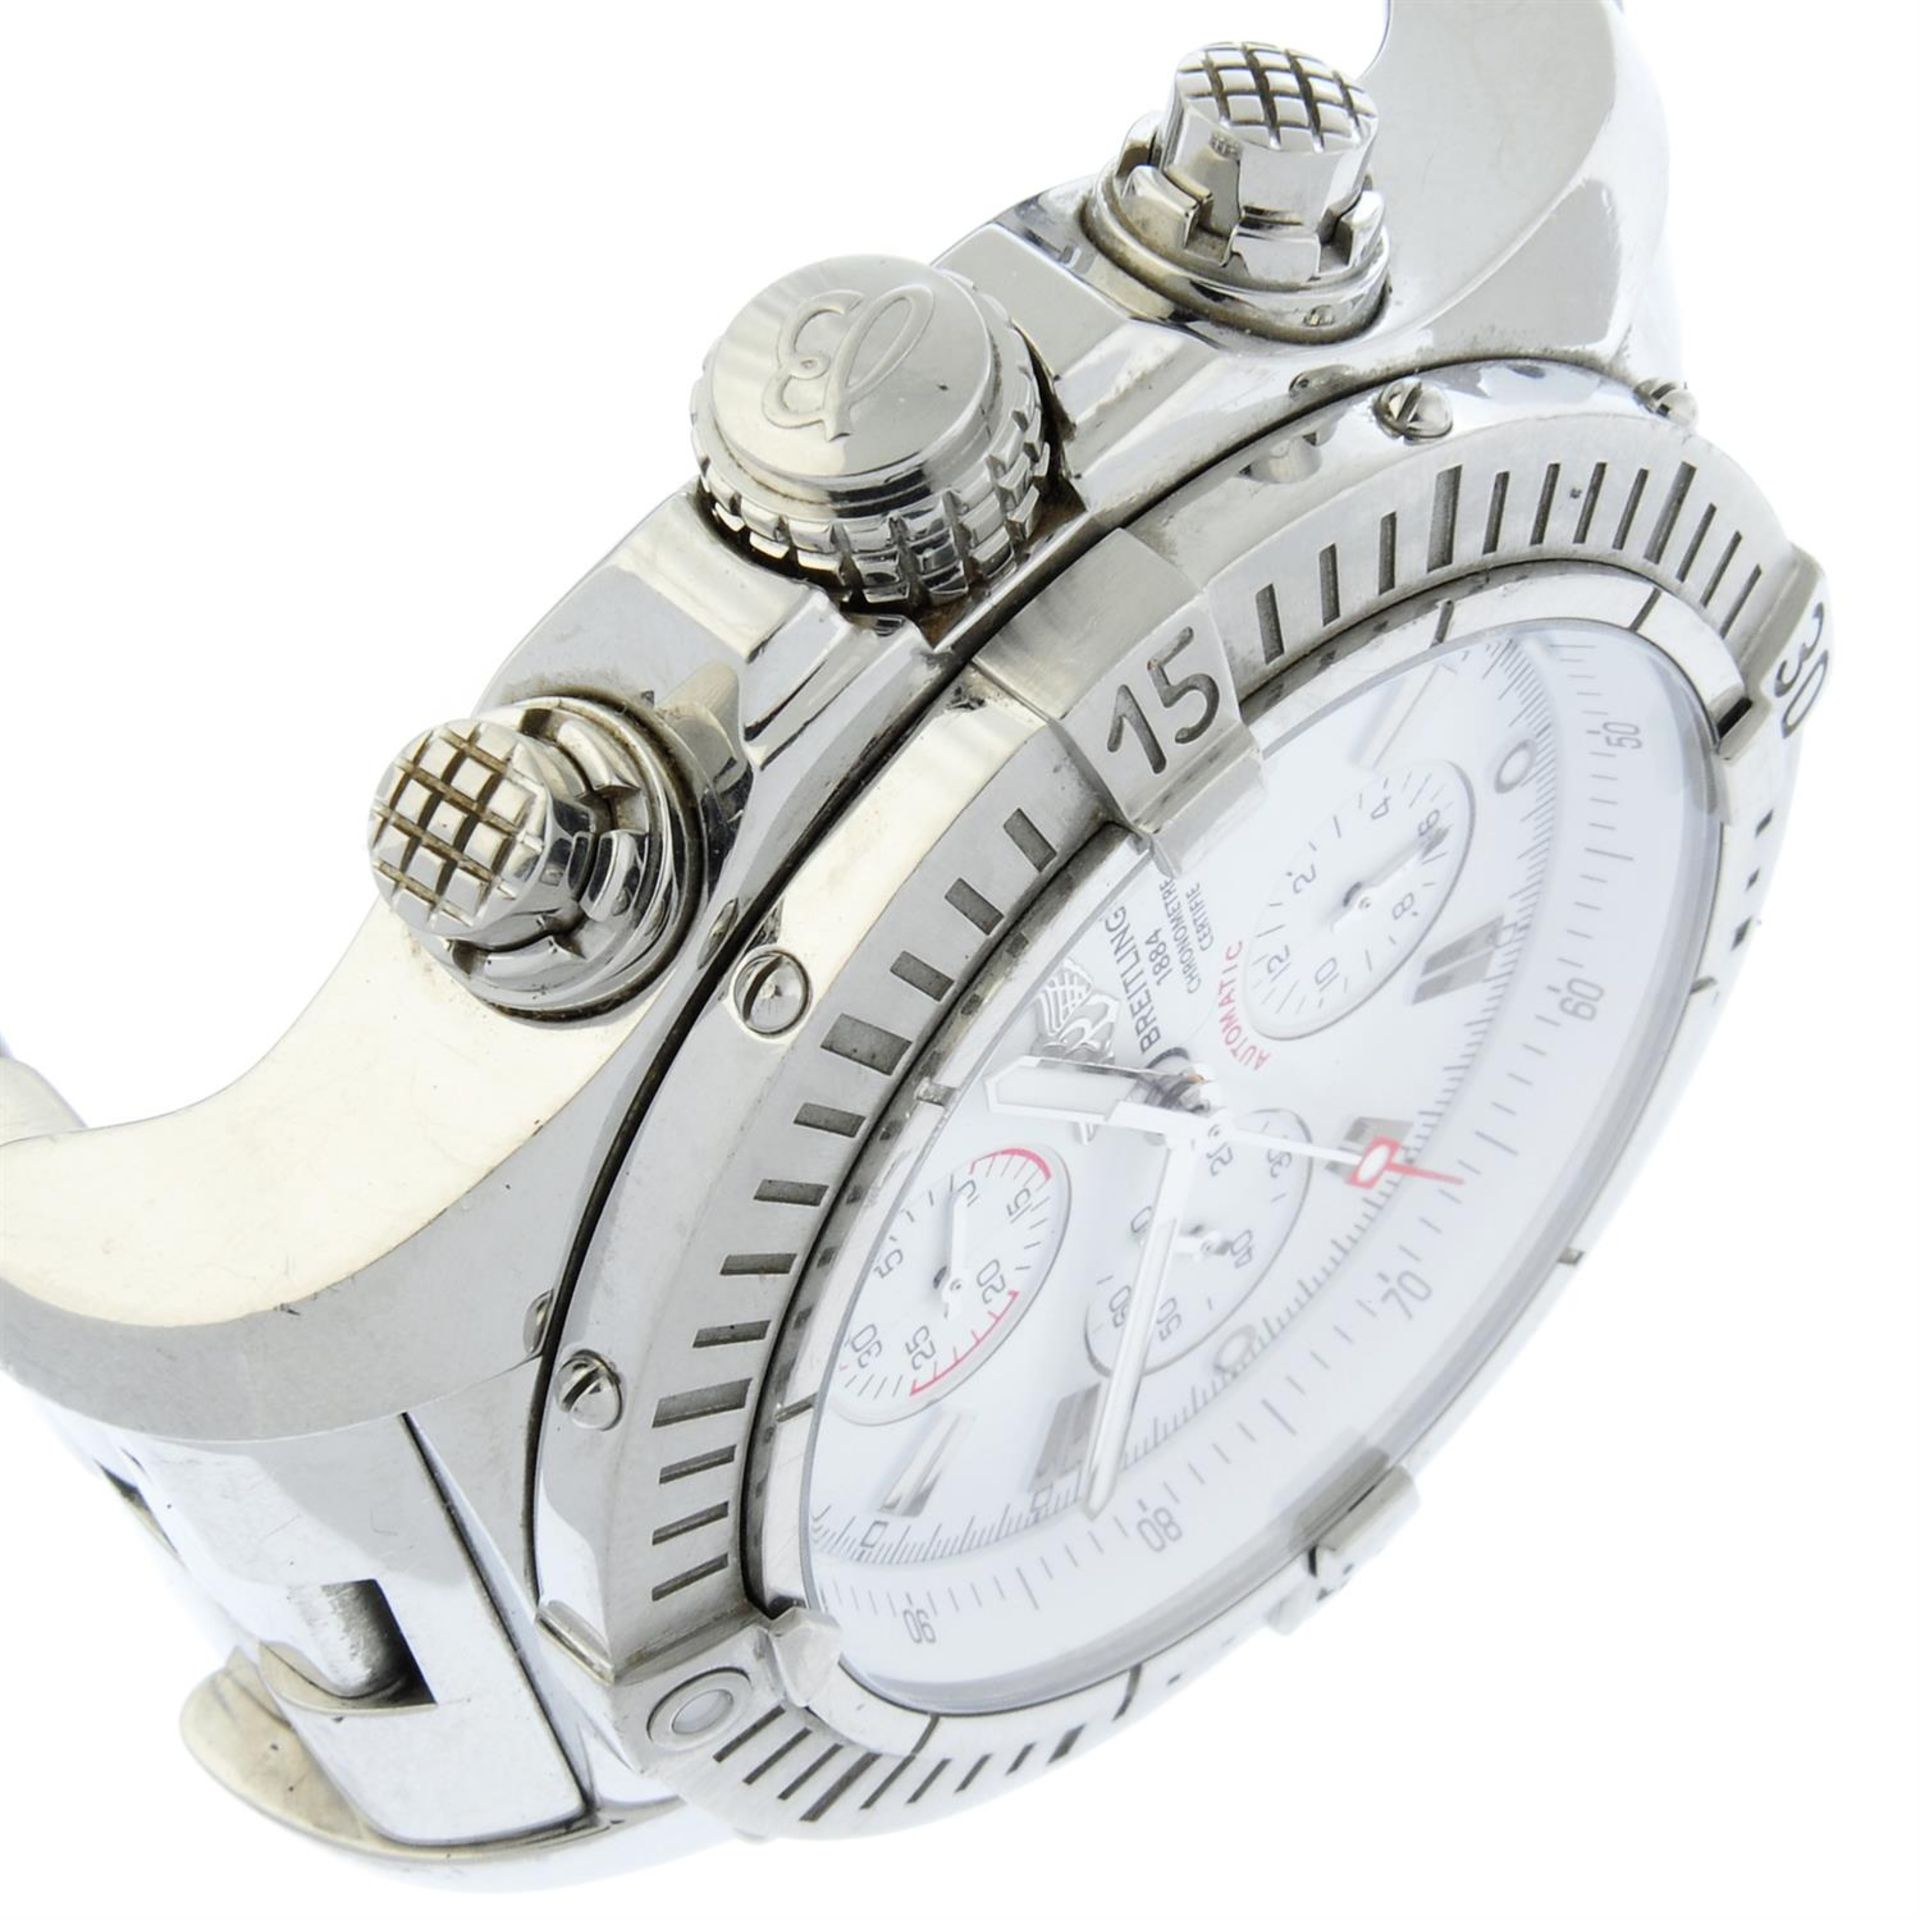 Breitling - a Super Avenger watch, 50mm. - Image 3 of 4